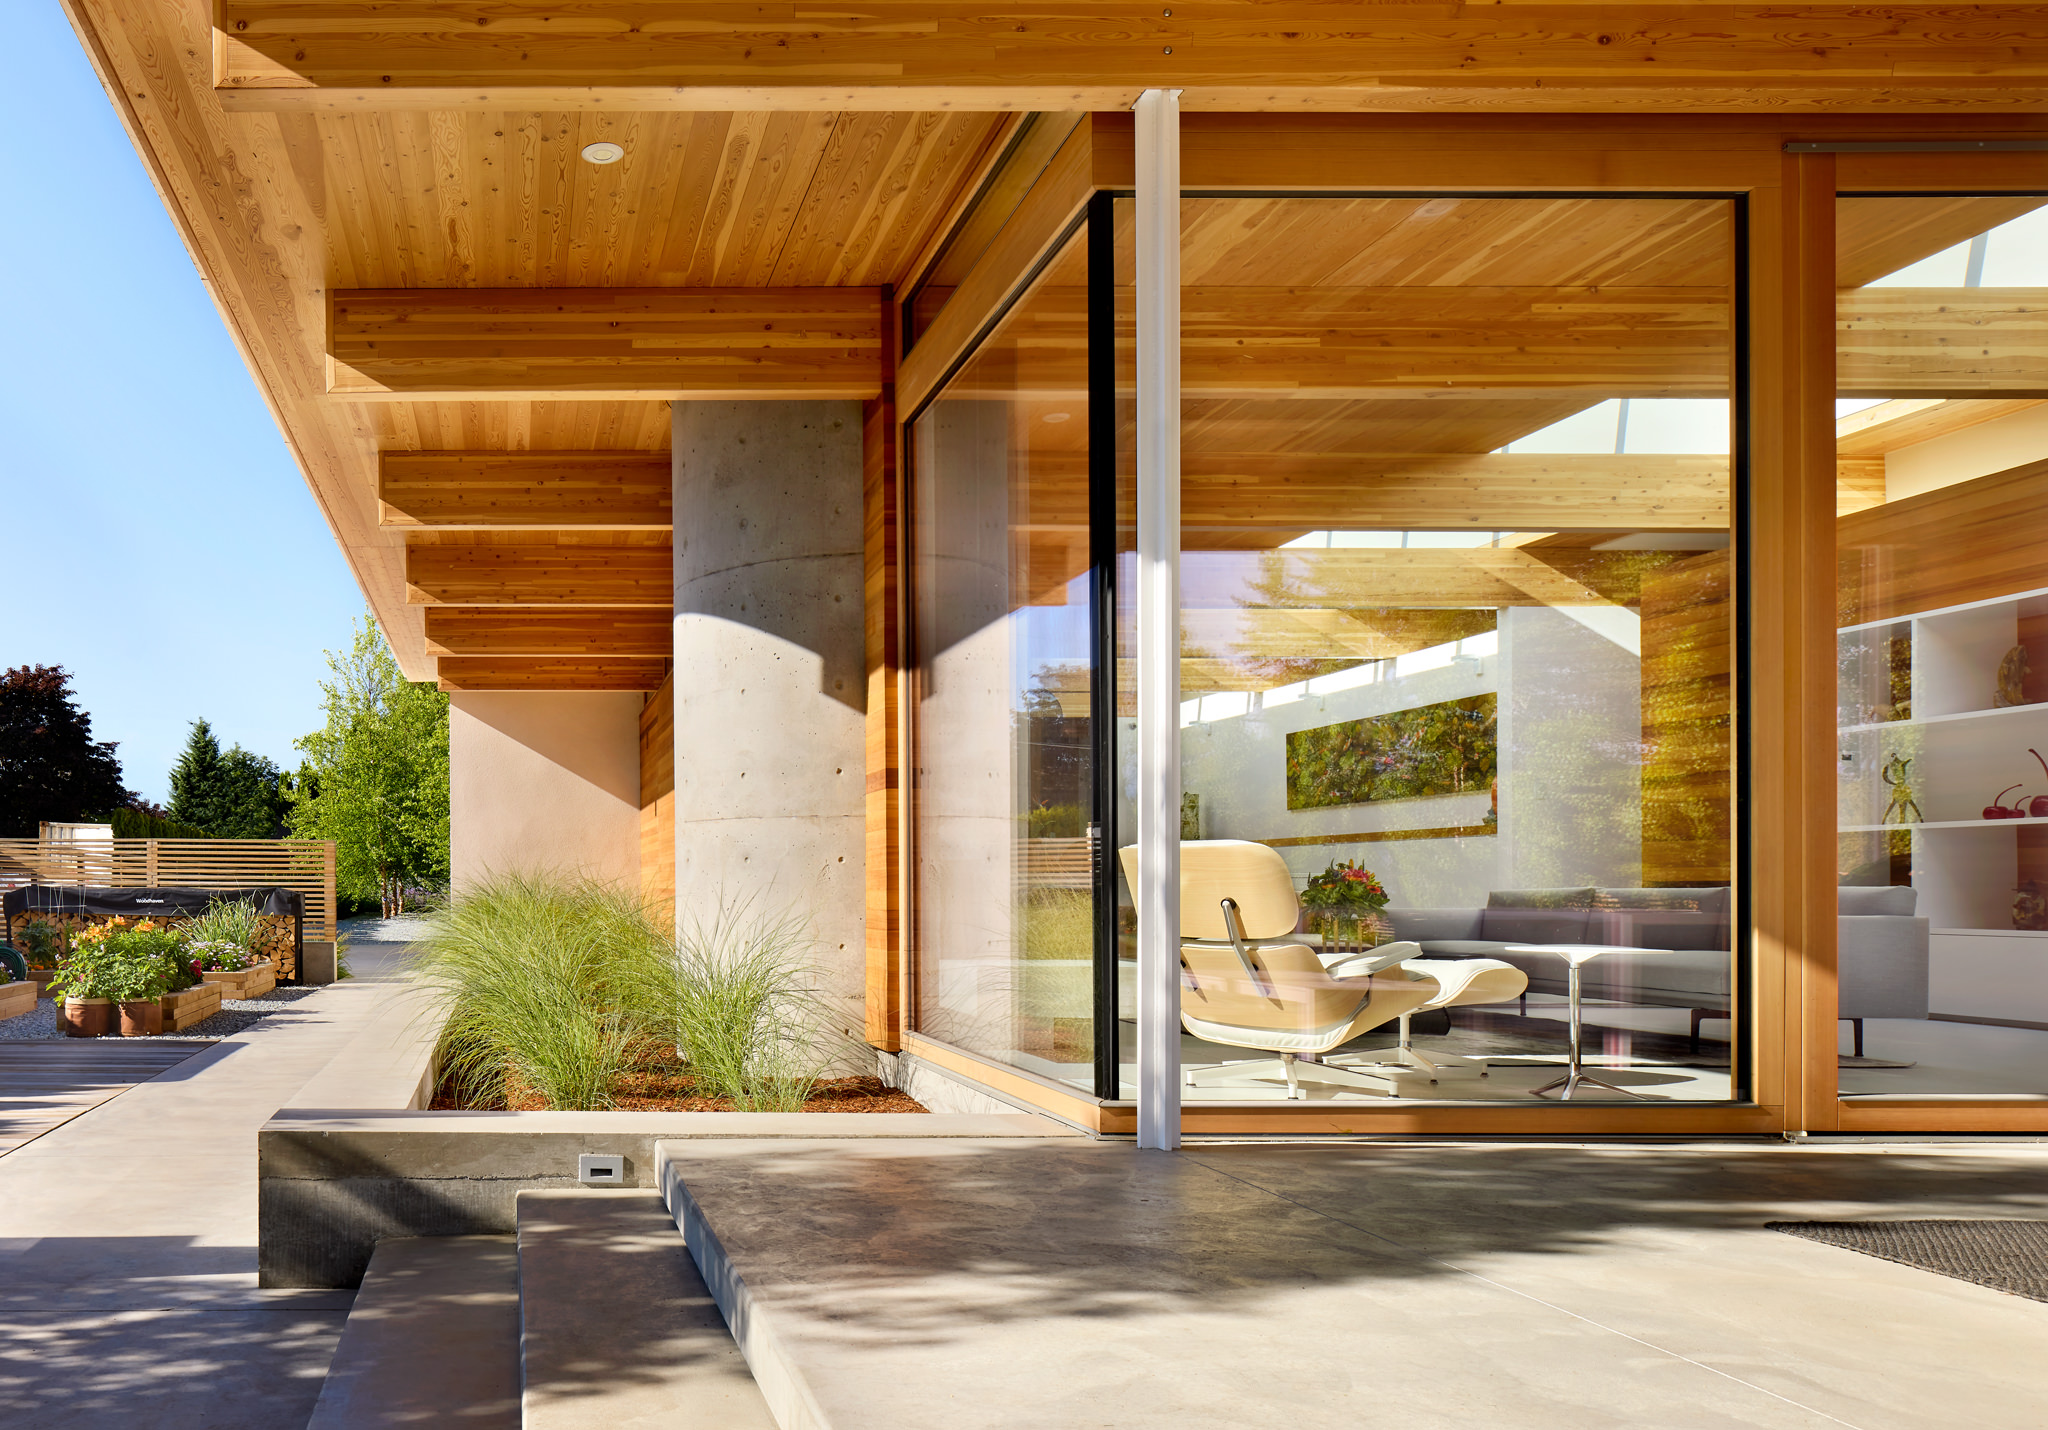 View to interior though large glass doors of modern wood house with Eames chair inside